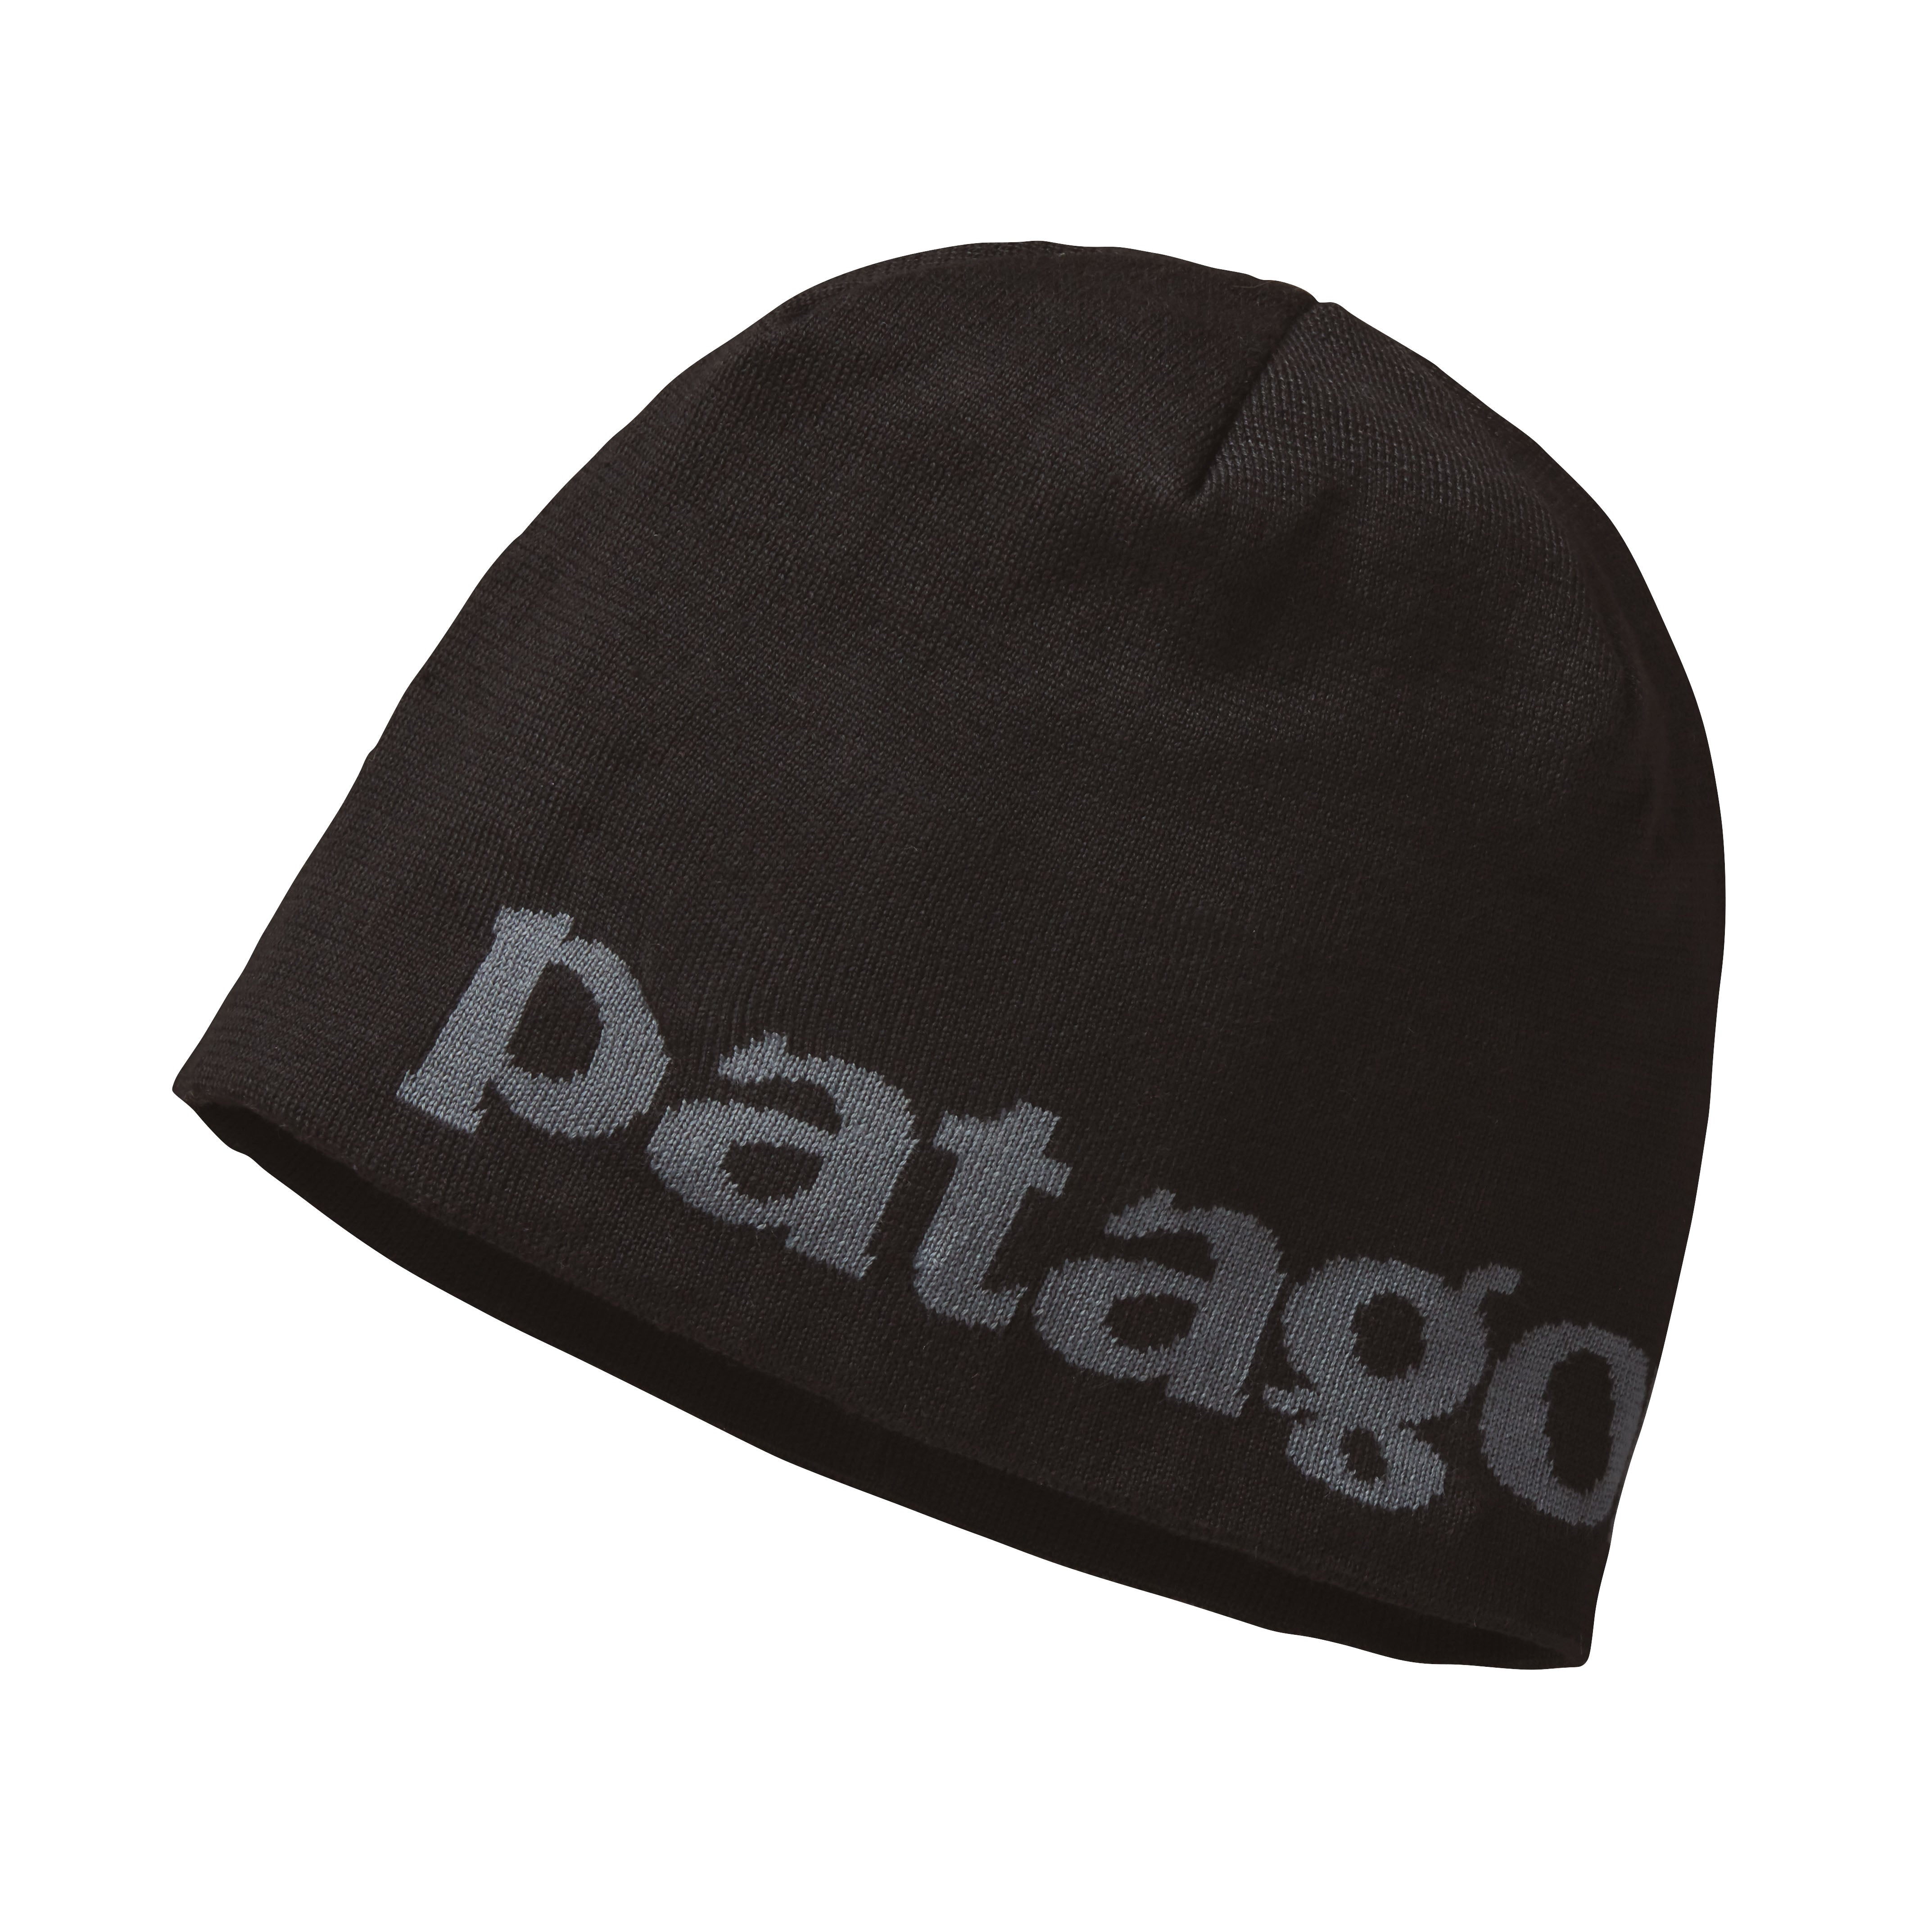 Patagonia Beanie Hat — Native Outfitters Summit Adventure